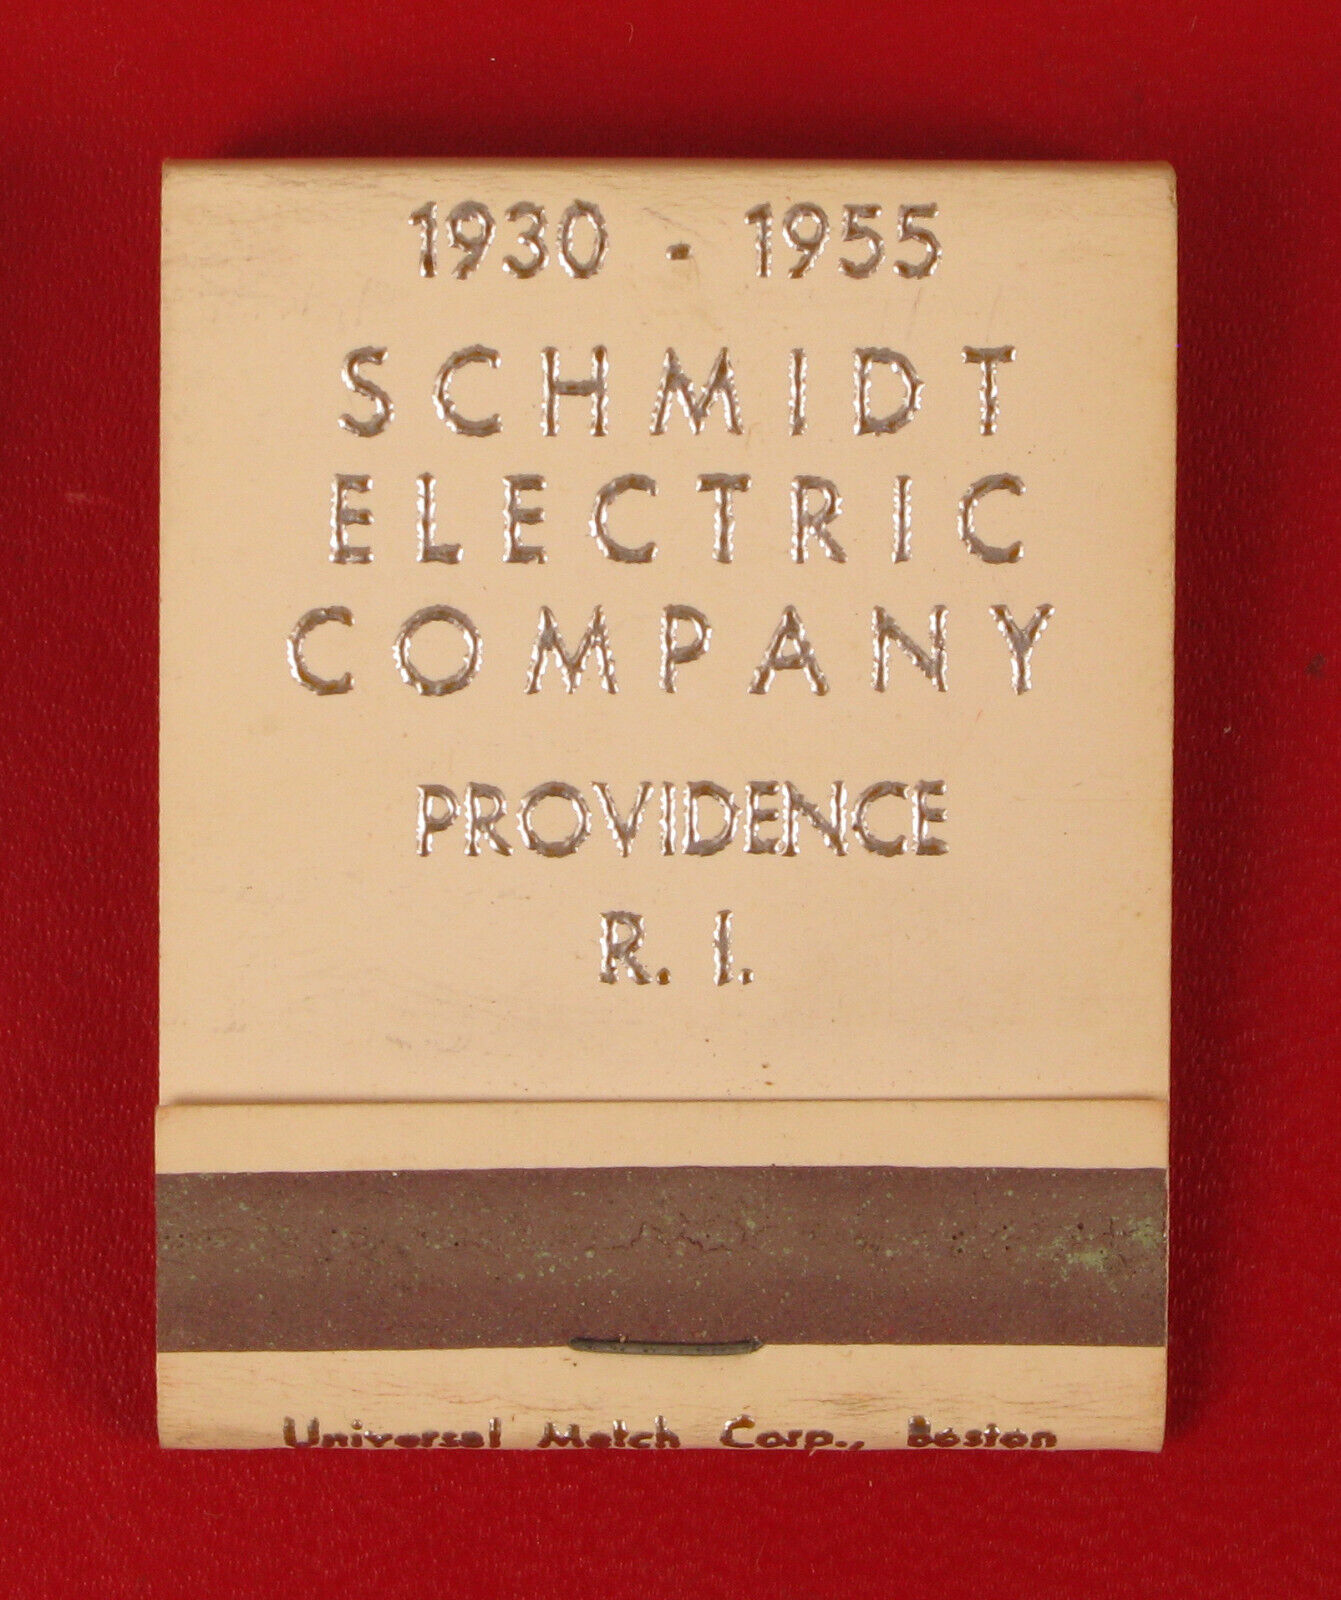 VINTAGE SCHMIDT ELECTRIC COMPANY PROVIDENCE RI ADVERTISING MATCHBOOK MATCHES 